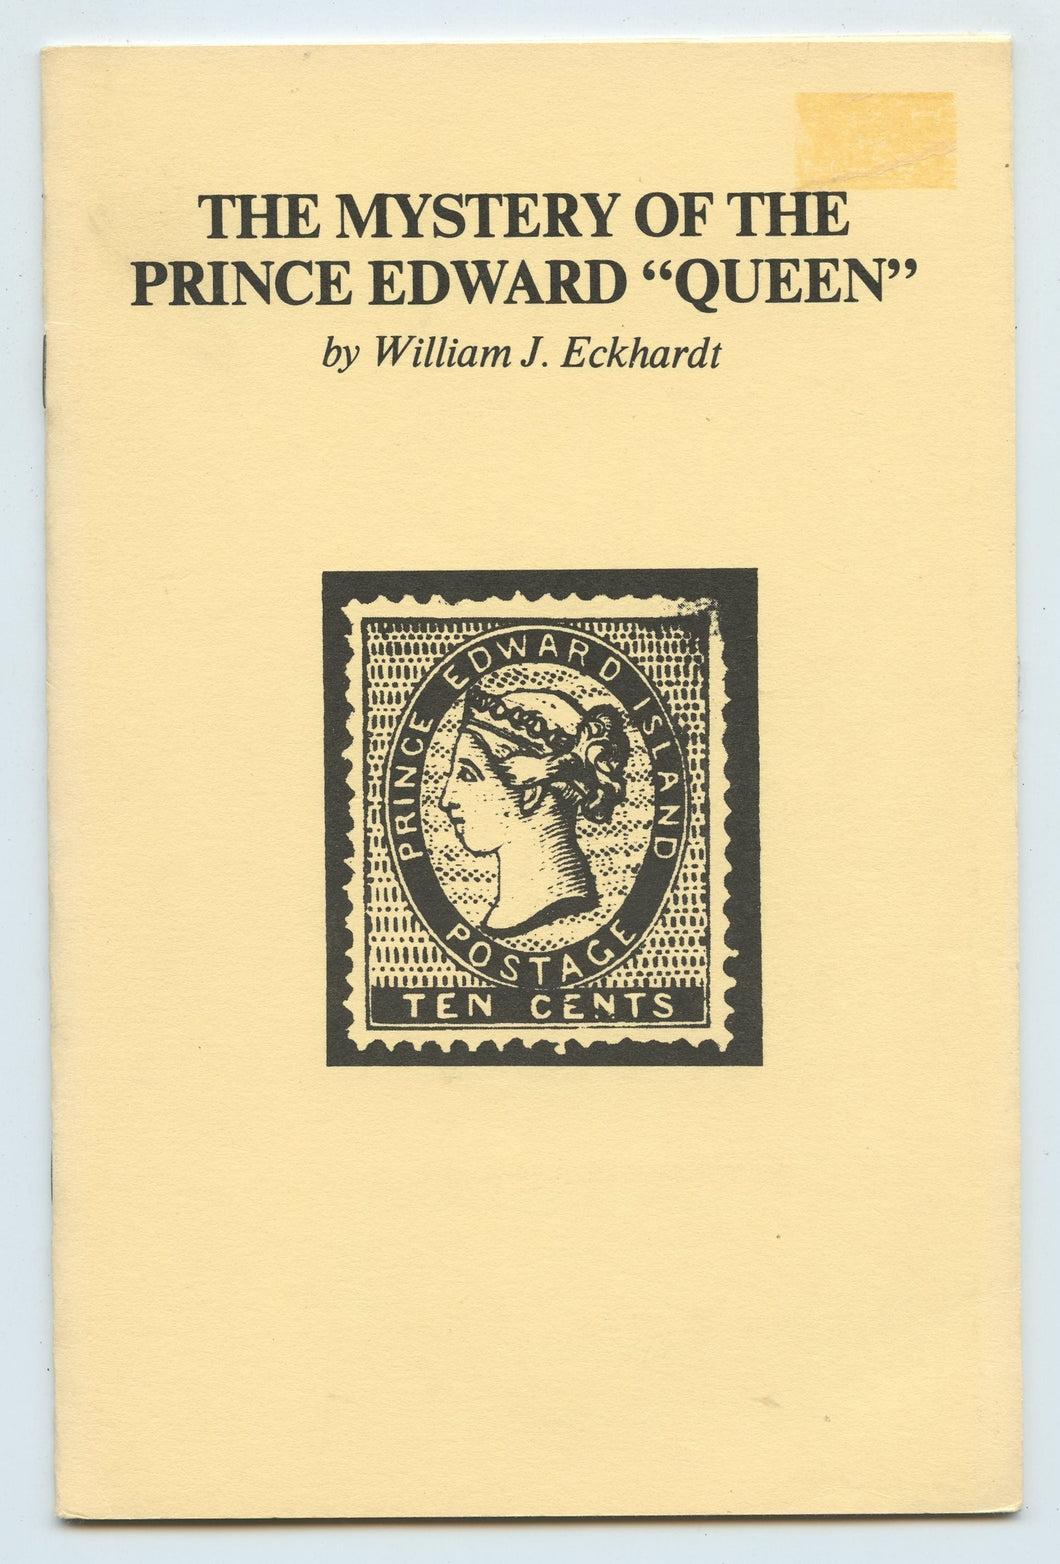 The Mystery of the Prince Edward "Queen"